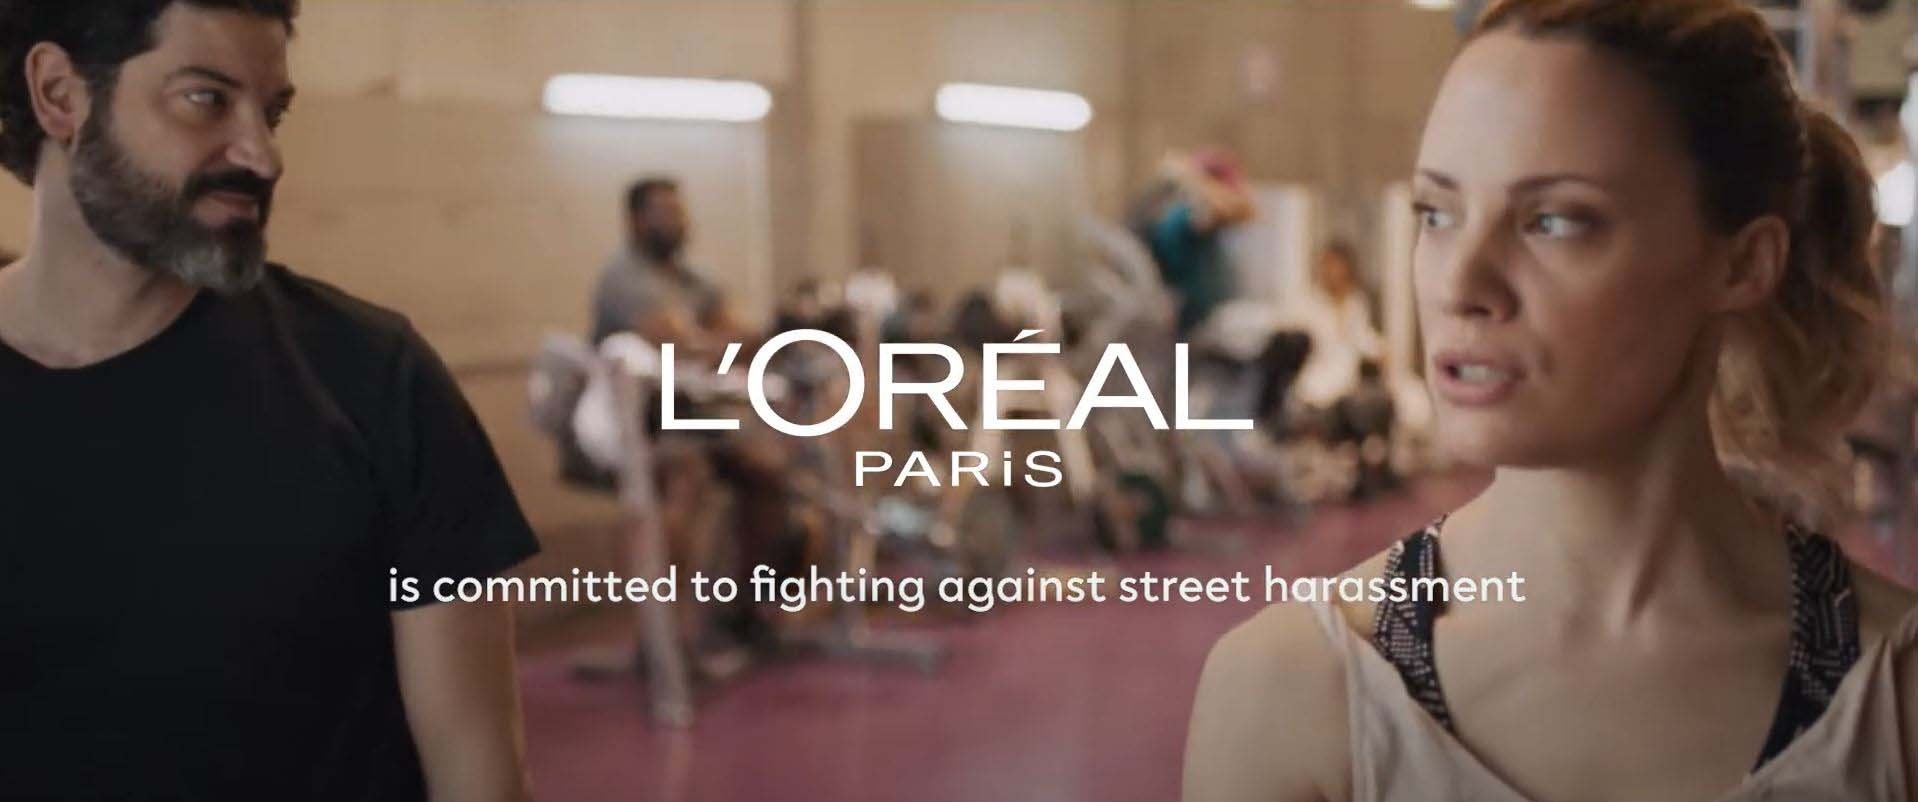 l'oréal paris is committed to stand up against street harassment